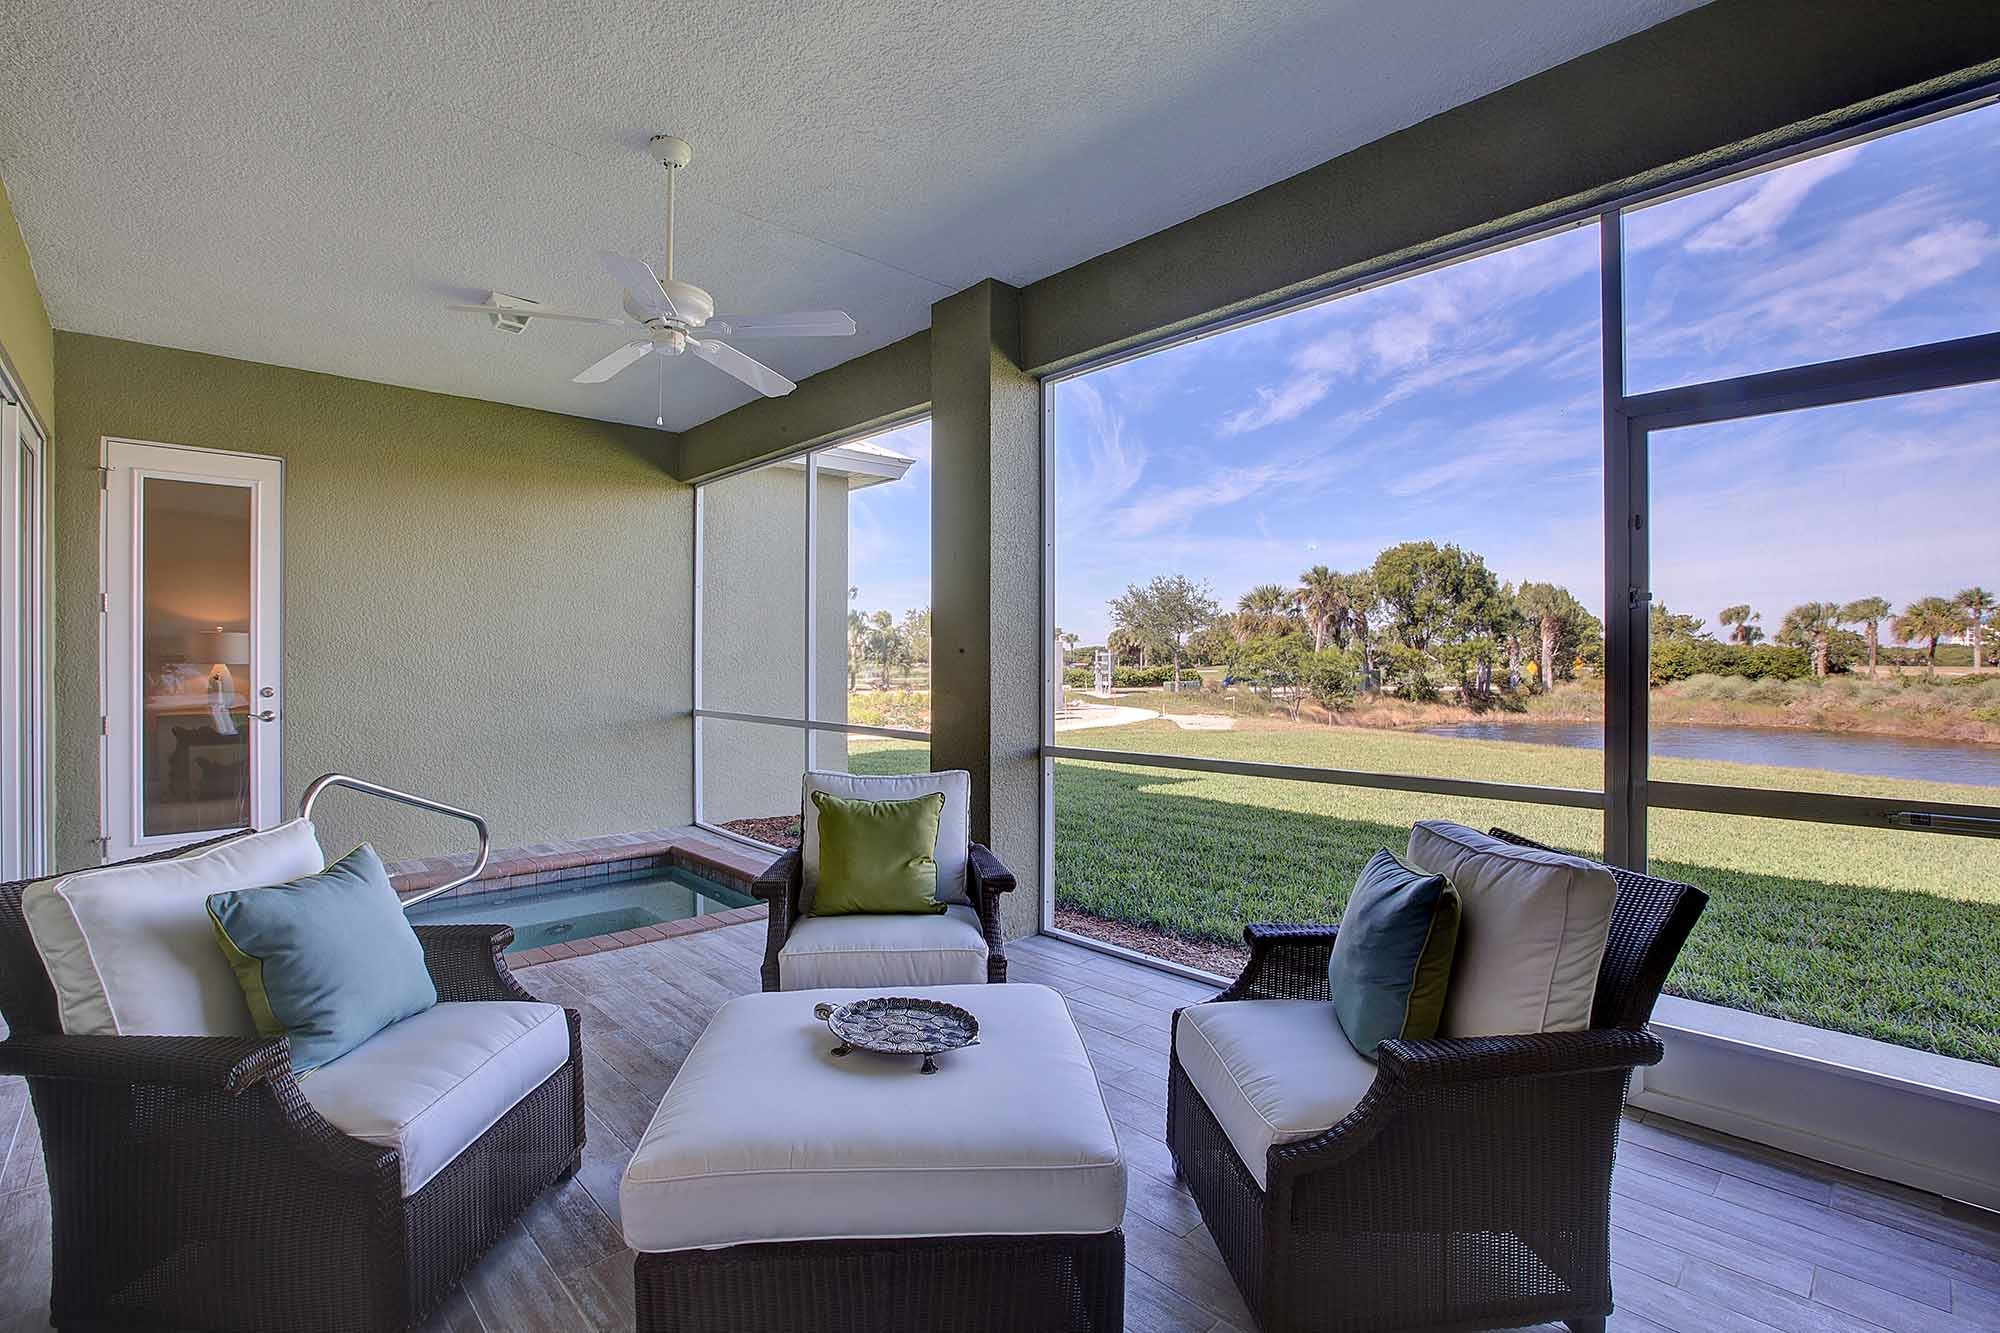 The lanai in the Captiva Model Home at Shell Point Retirement Community